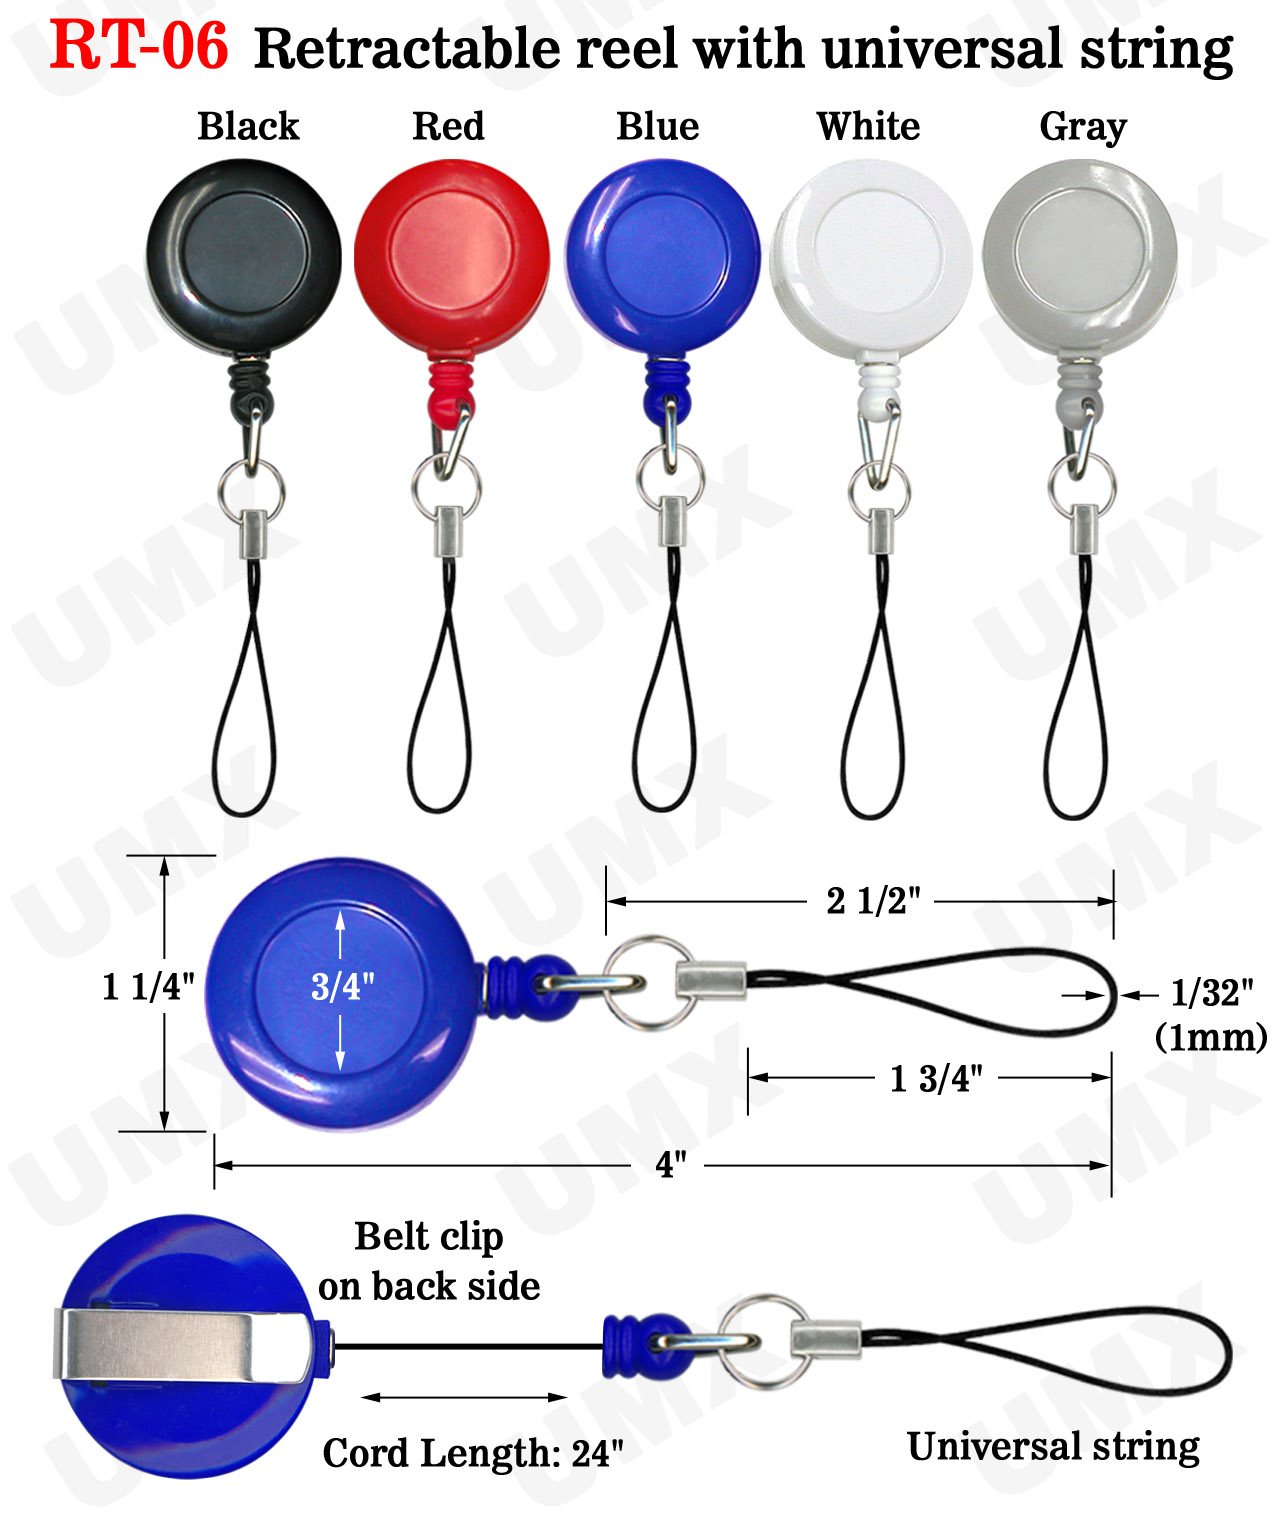 Retractable Reels With Universal Cell Phone Strings